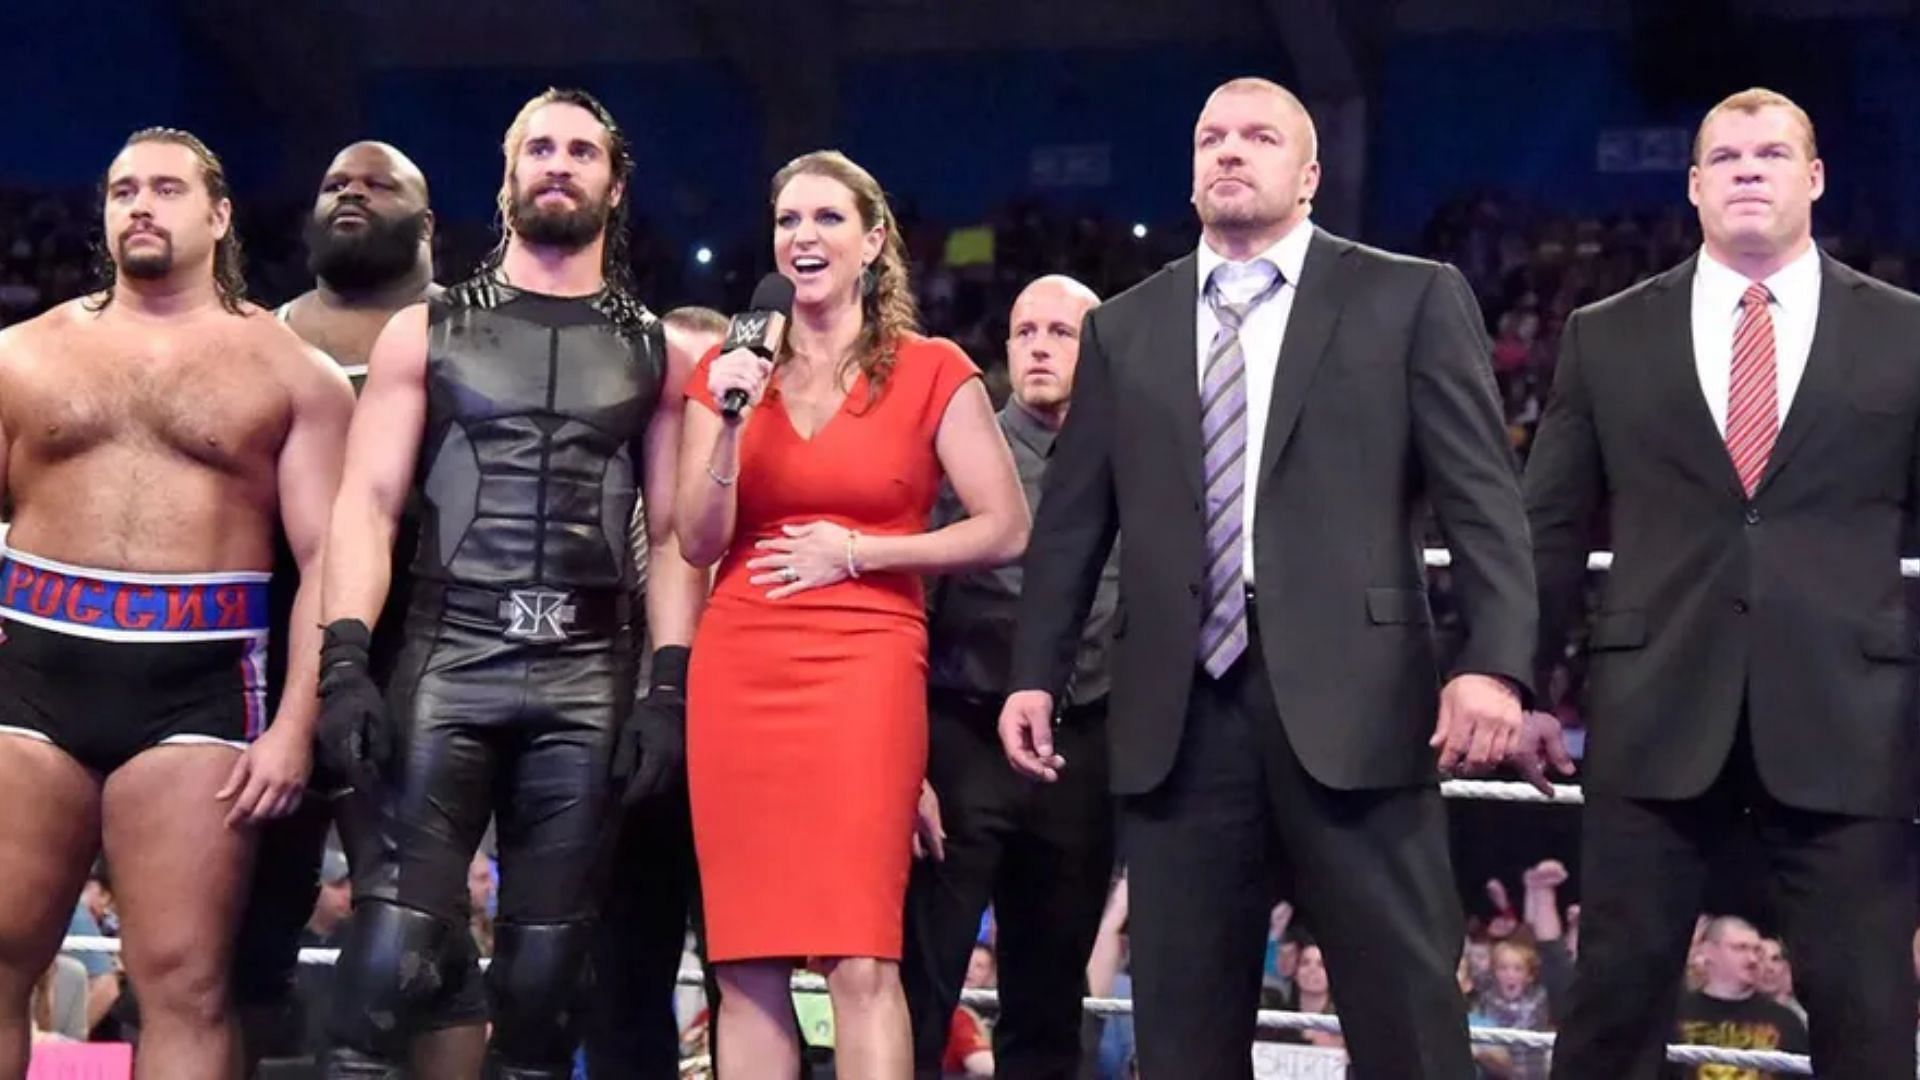 Stephanie McMahon, Triple H, and The Authority before WWE Survivor Series 2014.